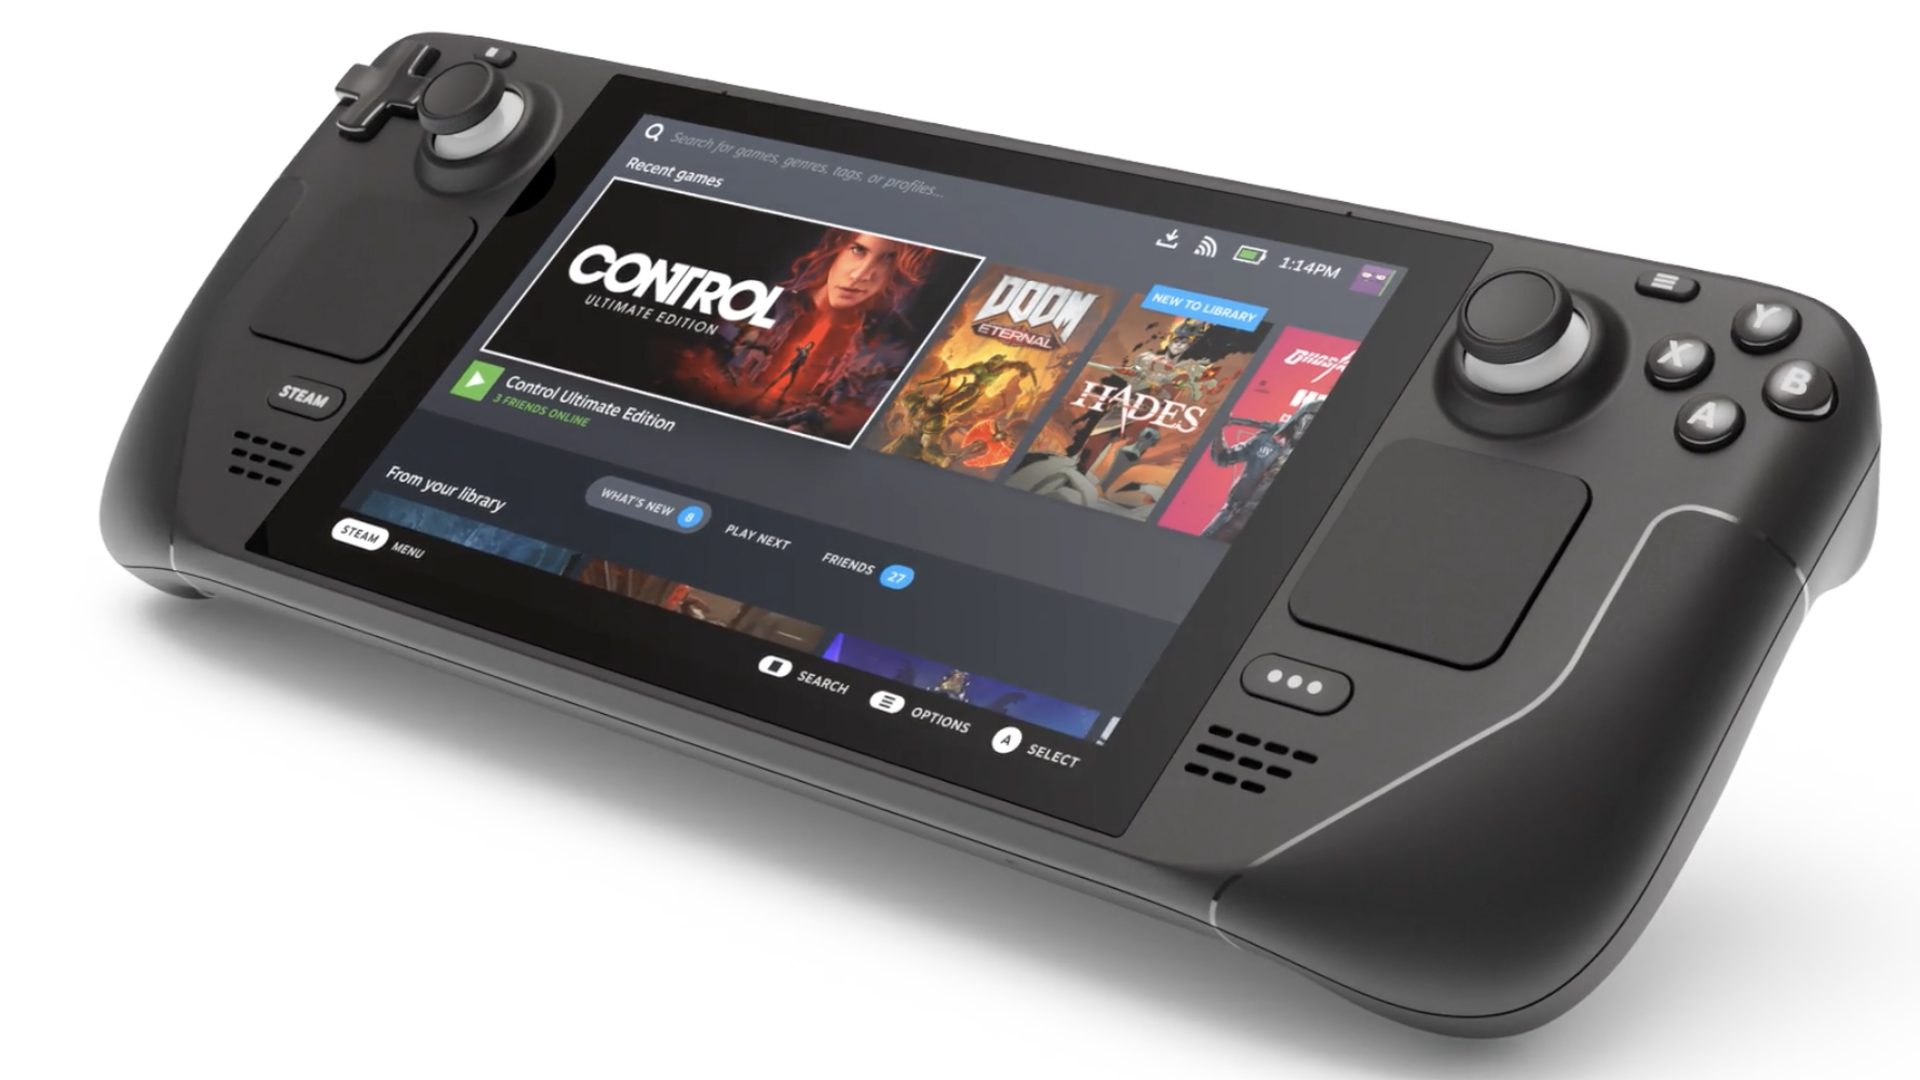 Photo of a handheld gaming PC